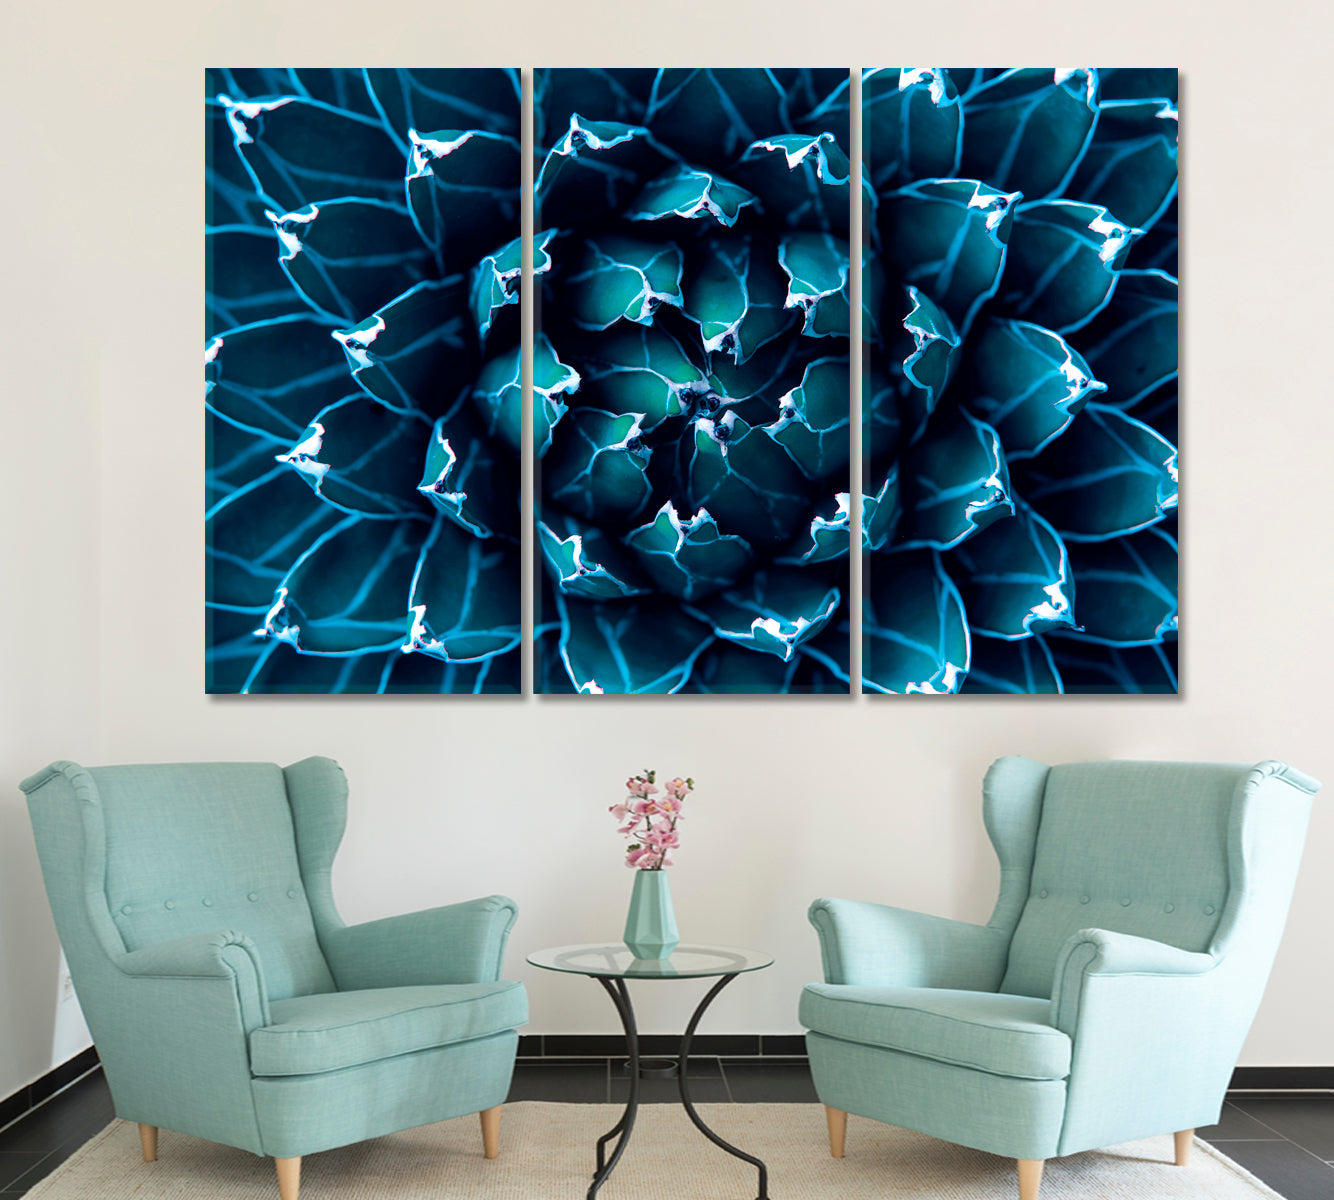 Agave Cactus Abstract Natural Tropical Pattern Floral & Botanical Split Art Artesty 3 panels 36" x 24" 